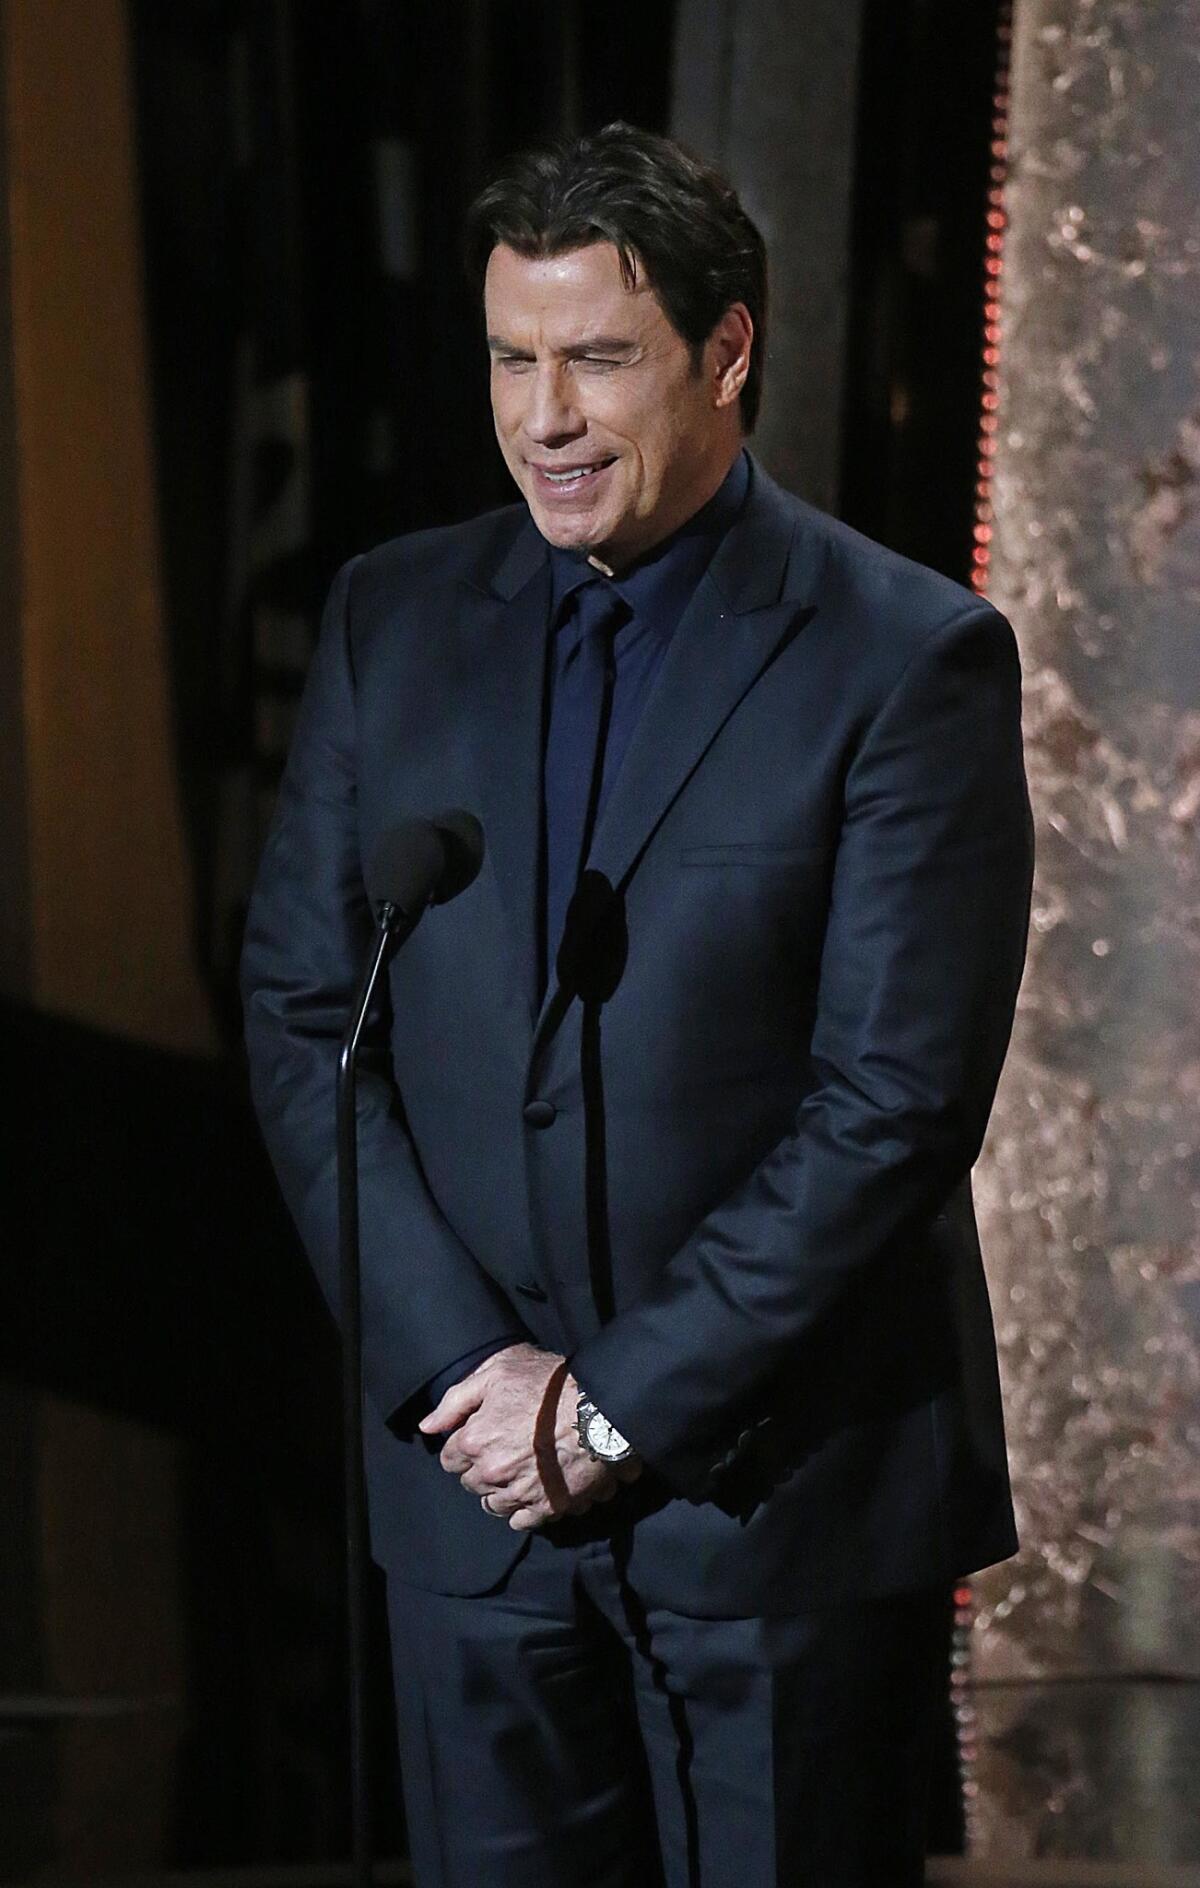 John Travolta onstage to introduce Idina Menzel (which he flubbed) during the telecast of the 86th Academy Awards.